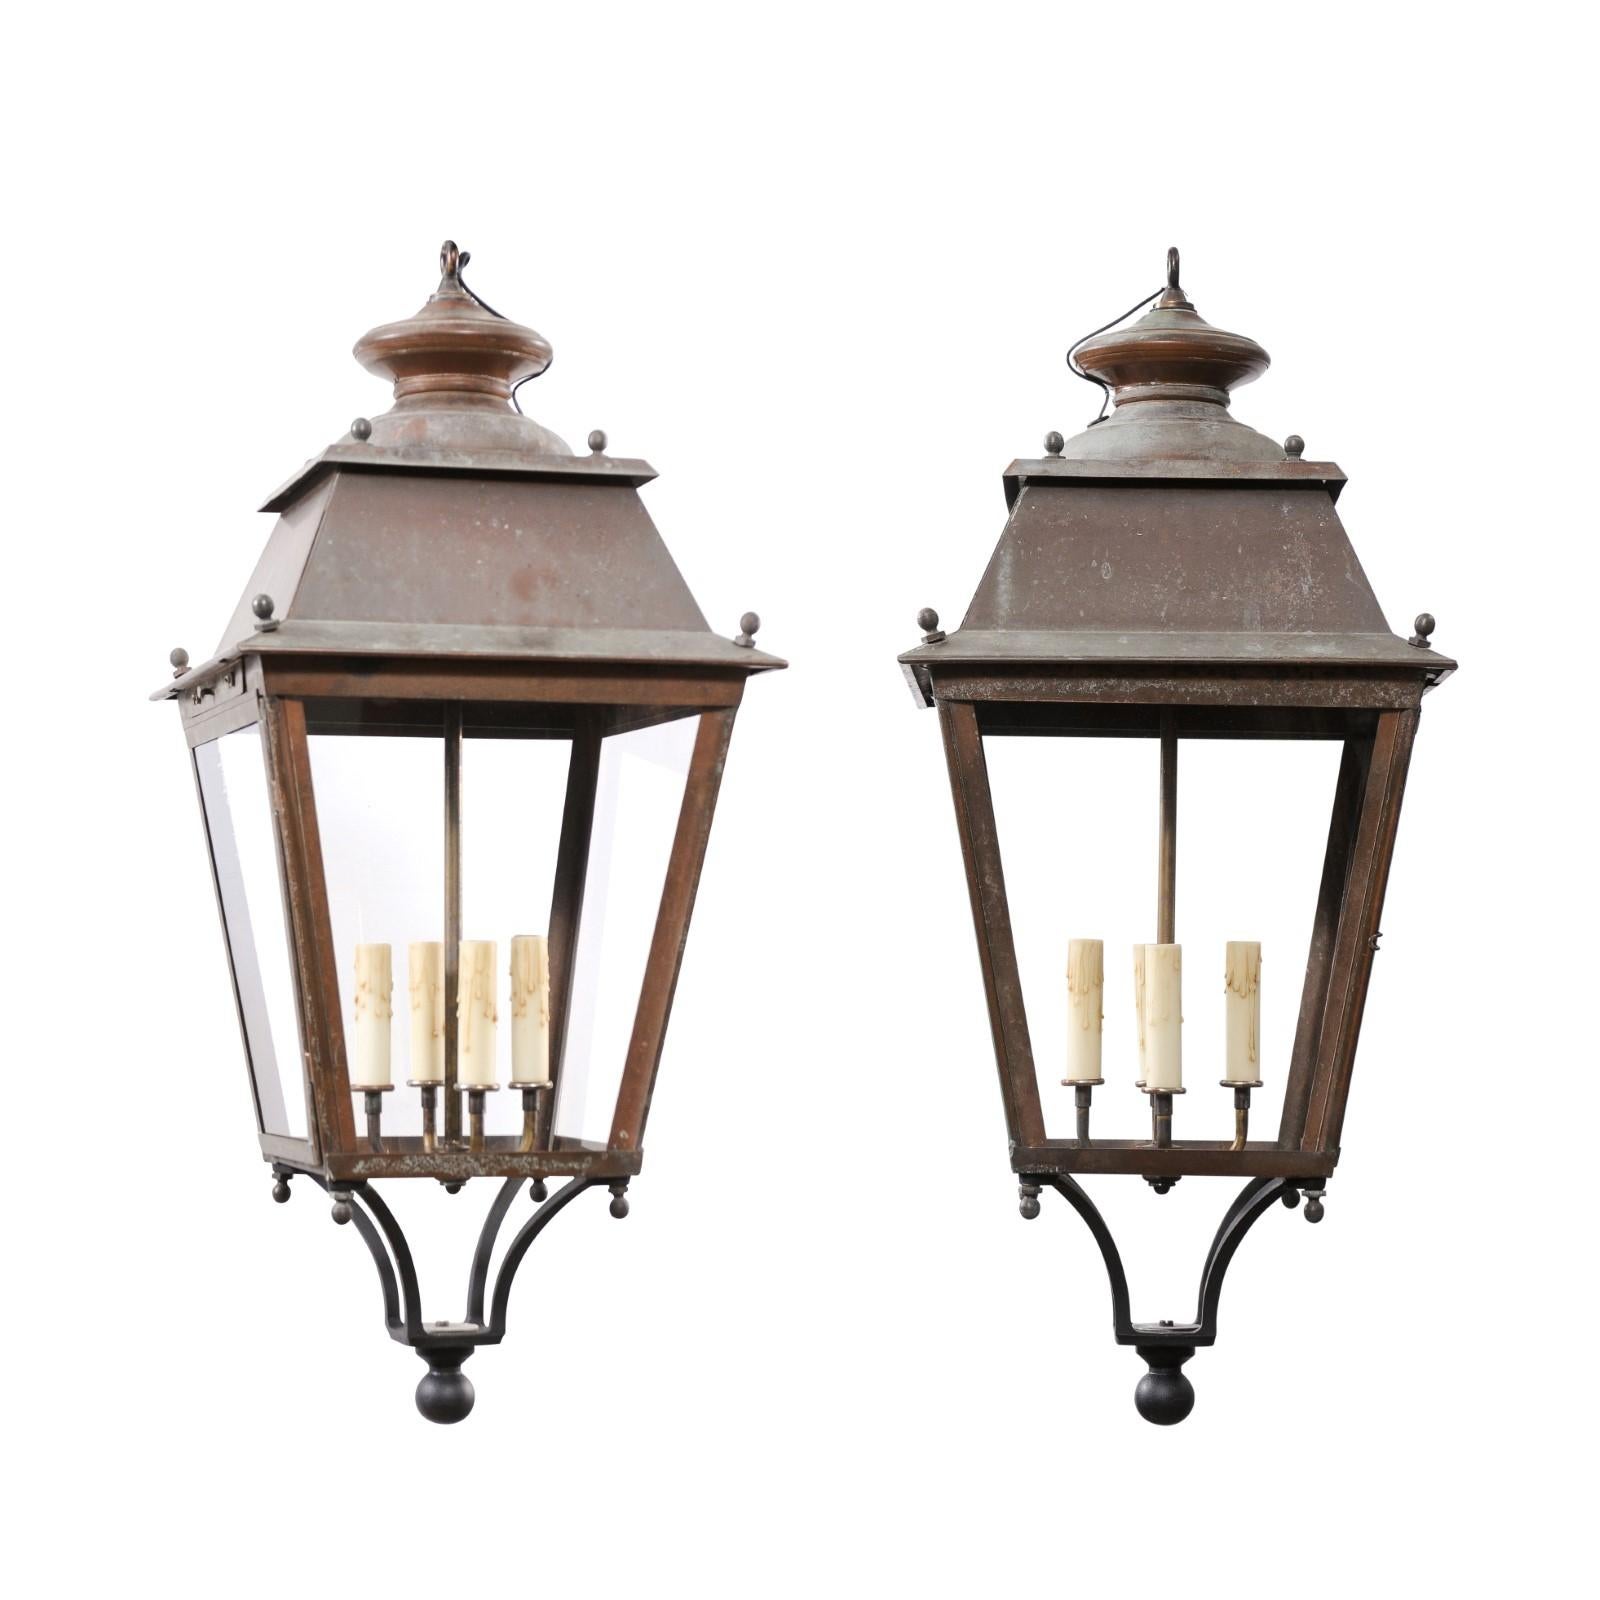 Two French copper four-light lanterns from the 20th century with glass panels, tapering silhouettes and petite spheres. These two French copper lanterns from the 20th century, each featuring four lights, present an elegant lighting solution with